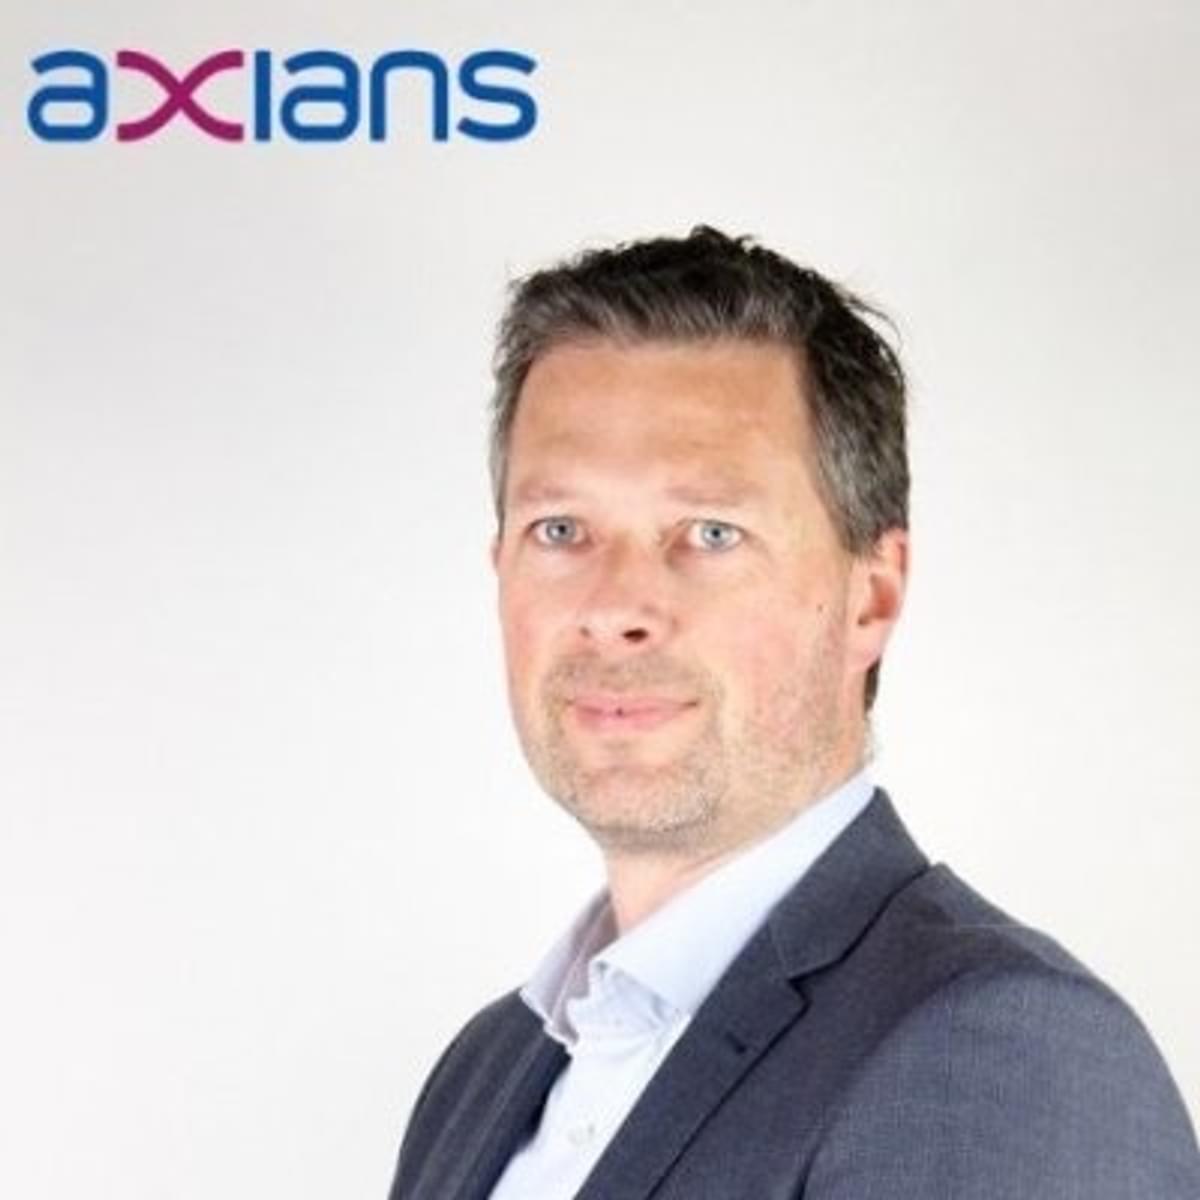 Edwin Kanis is Manager Marketing & Innovation van Axians image